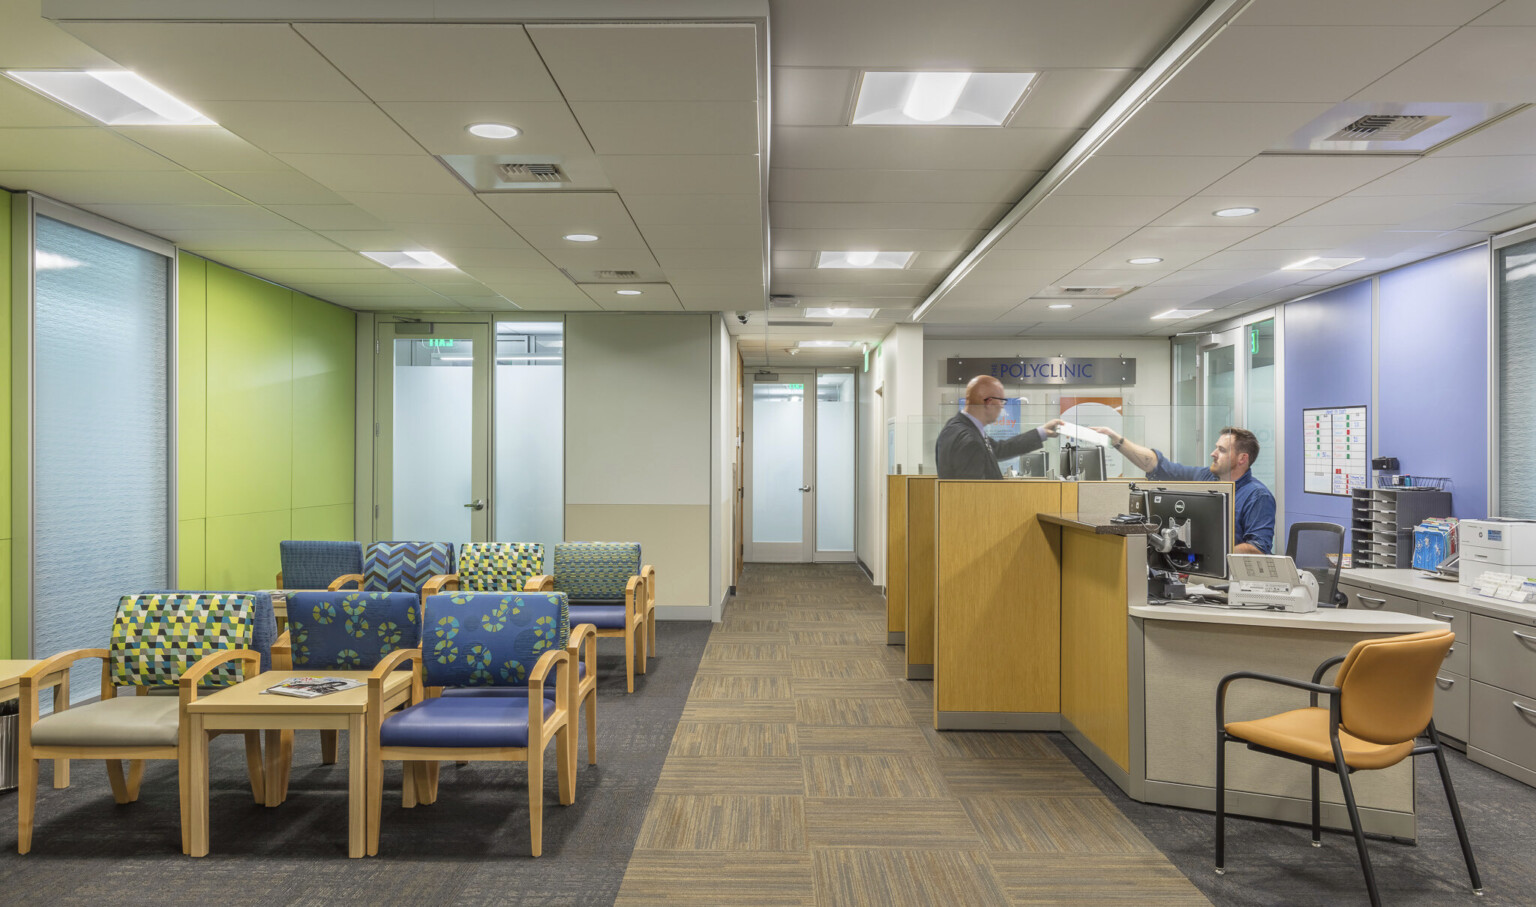 incorporating branding in the color scheme & signage create a sense of security through continuity for visiting patients, a lime green wall, blue and green patterned upholstery, light woods, taupe carpet